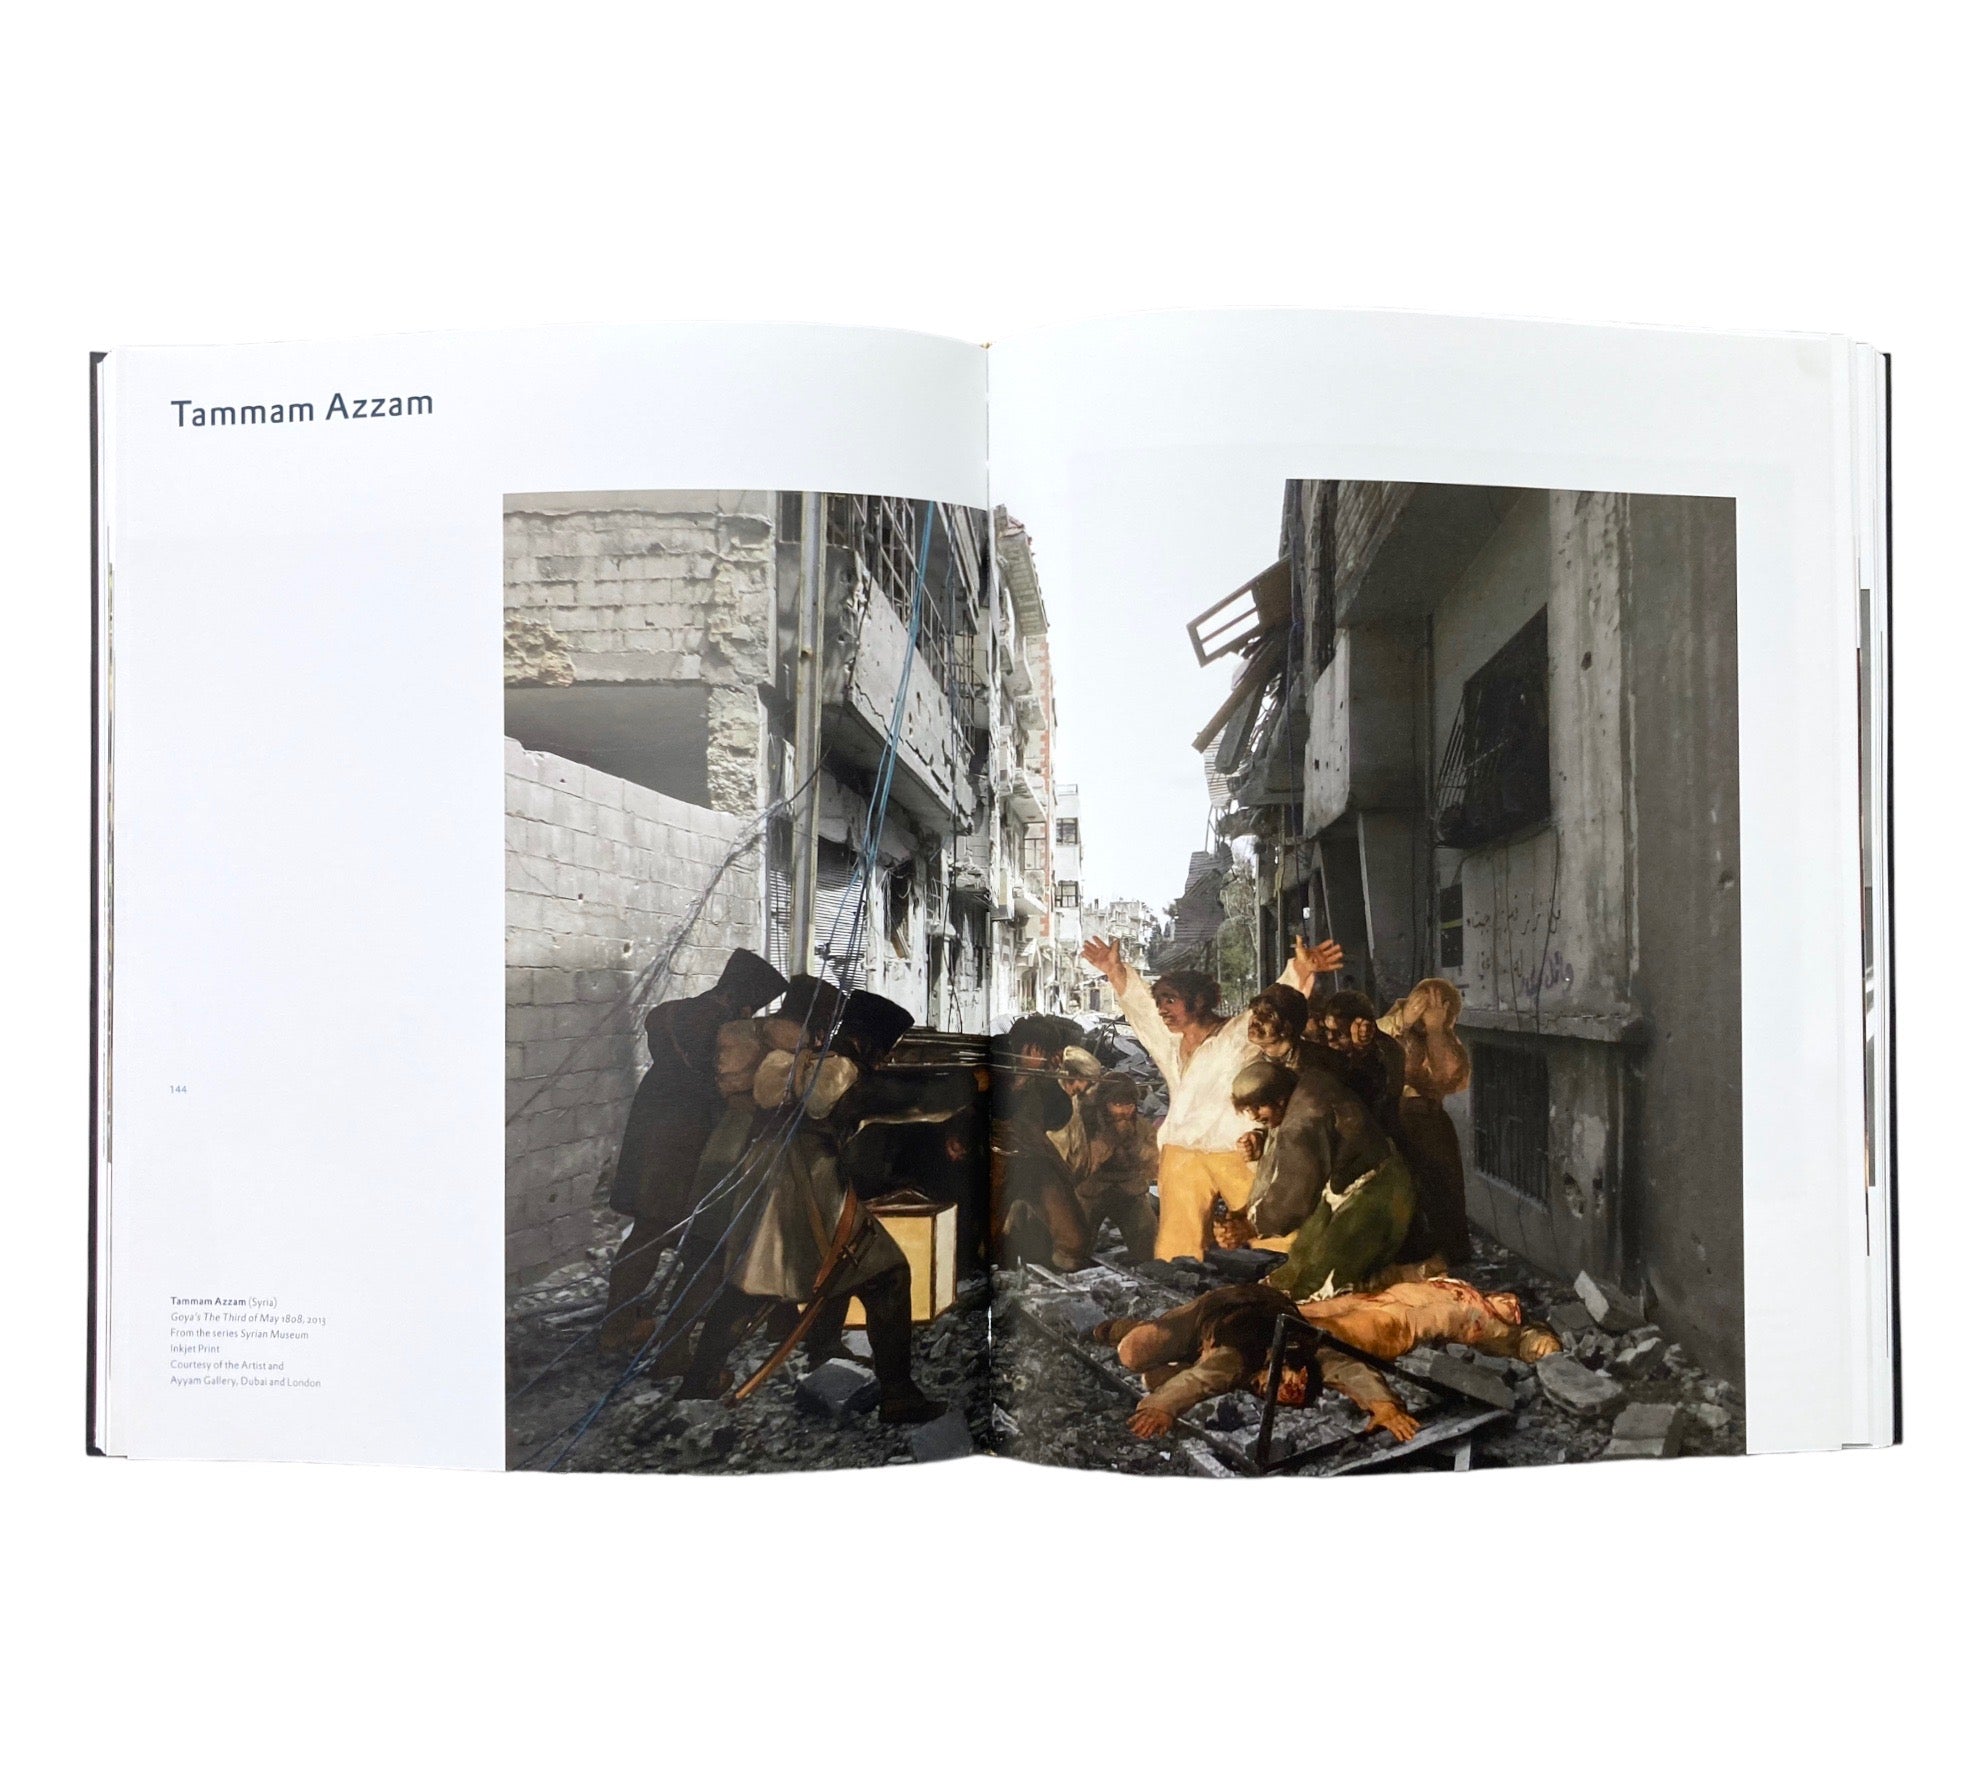 View From Inside: Contemporary Arab Photography, Video and Mixed Media Art (Non-mint)